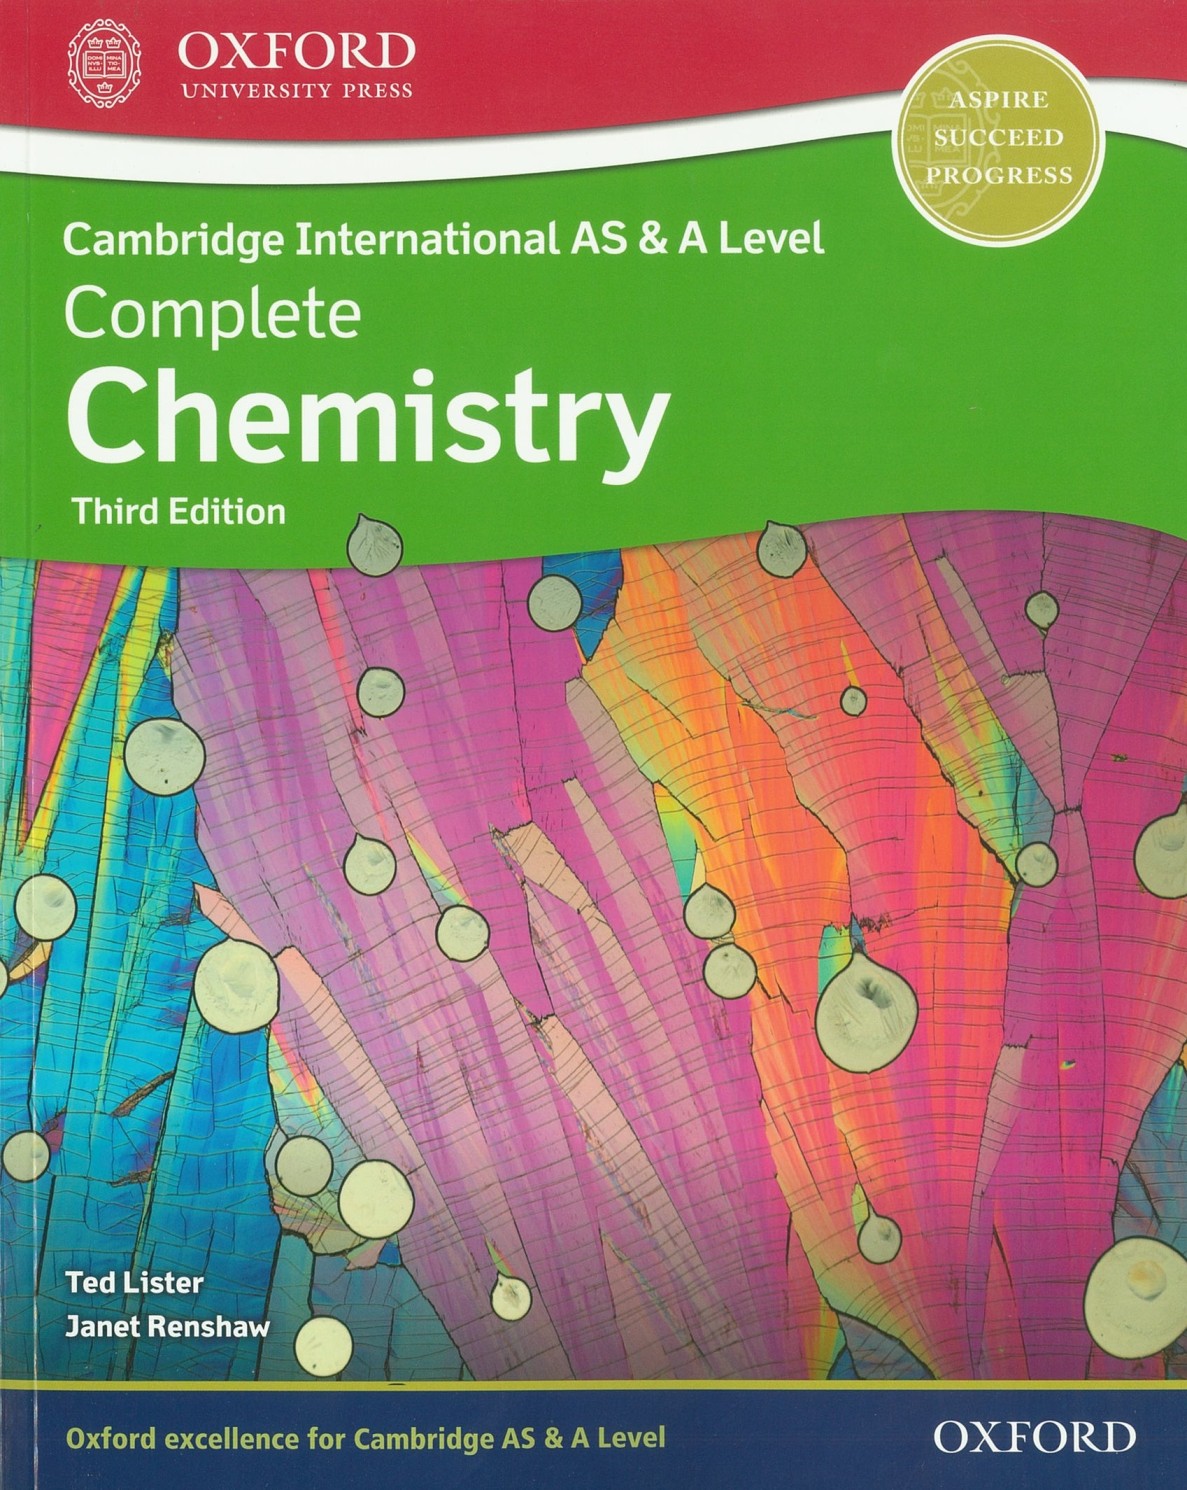 OUP - AS & A LEVEL  COMPLETE  CHEMISTRY 3RD ED - RENSHAW & LISTER .